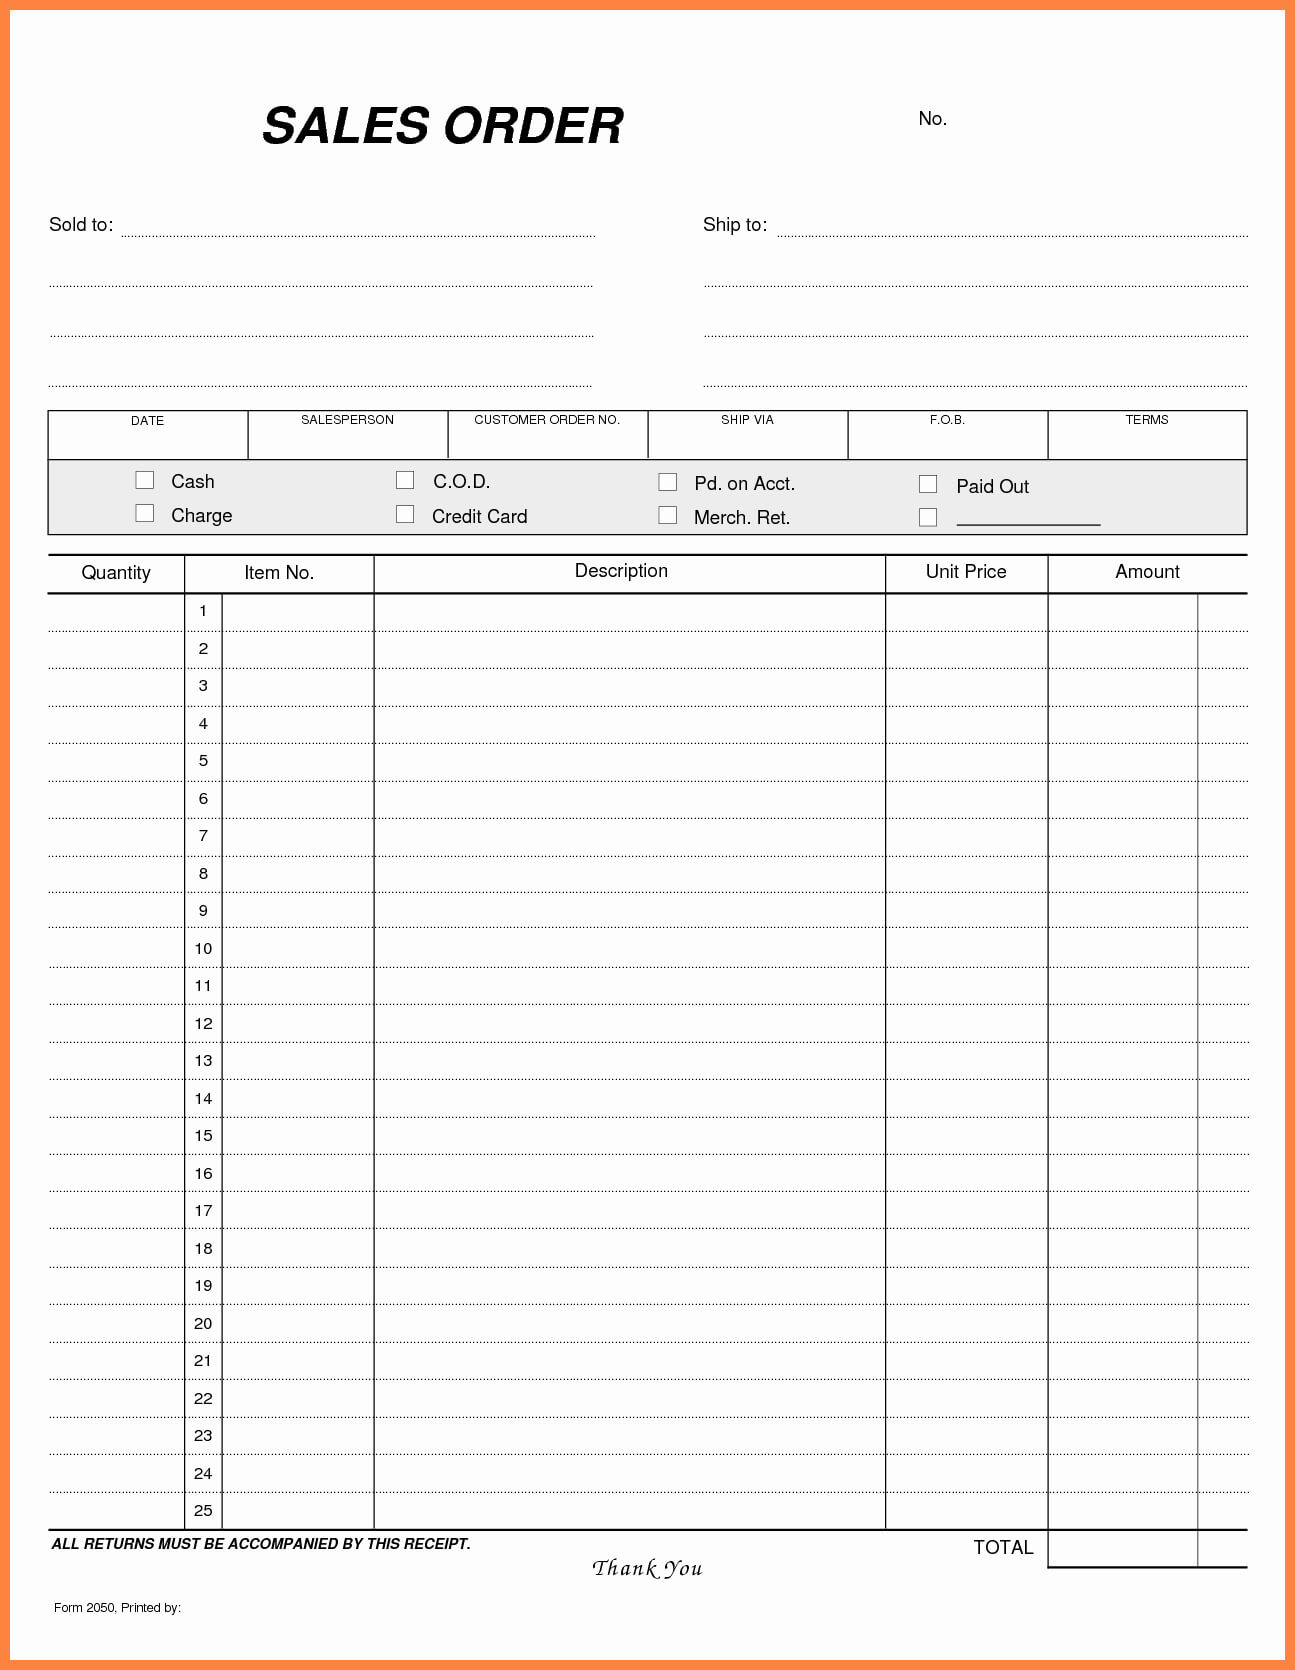 020 Food Order Form Template Ideas Top Result Lovely Pre Pic In Result Card Template